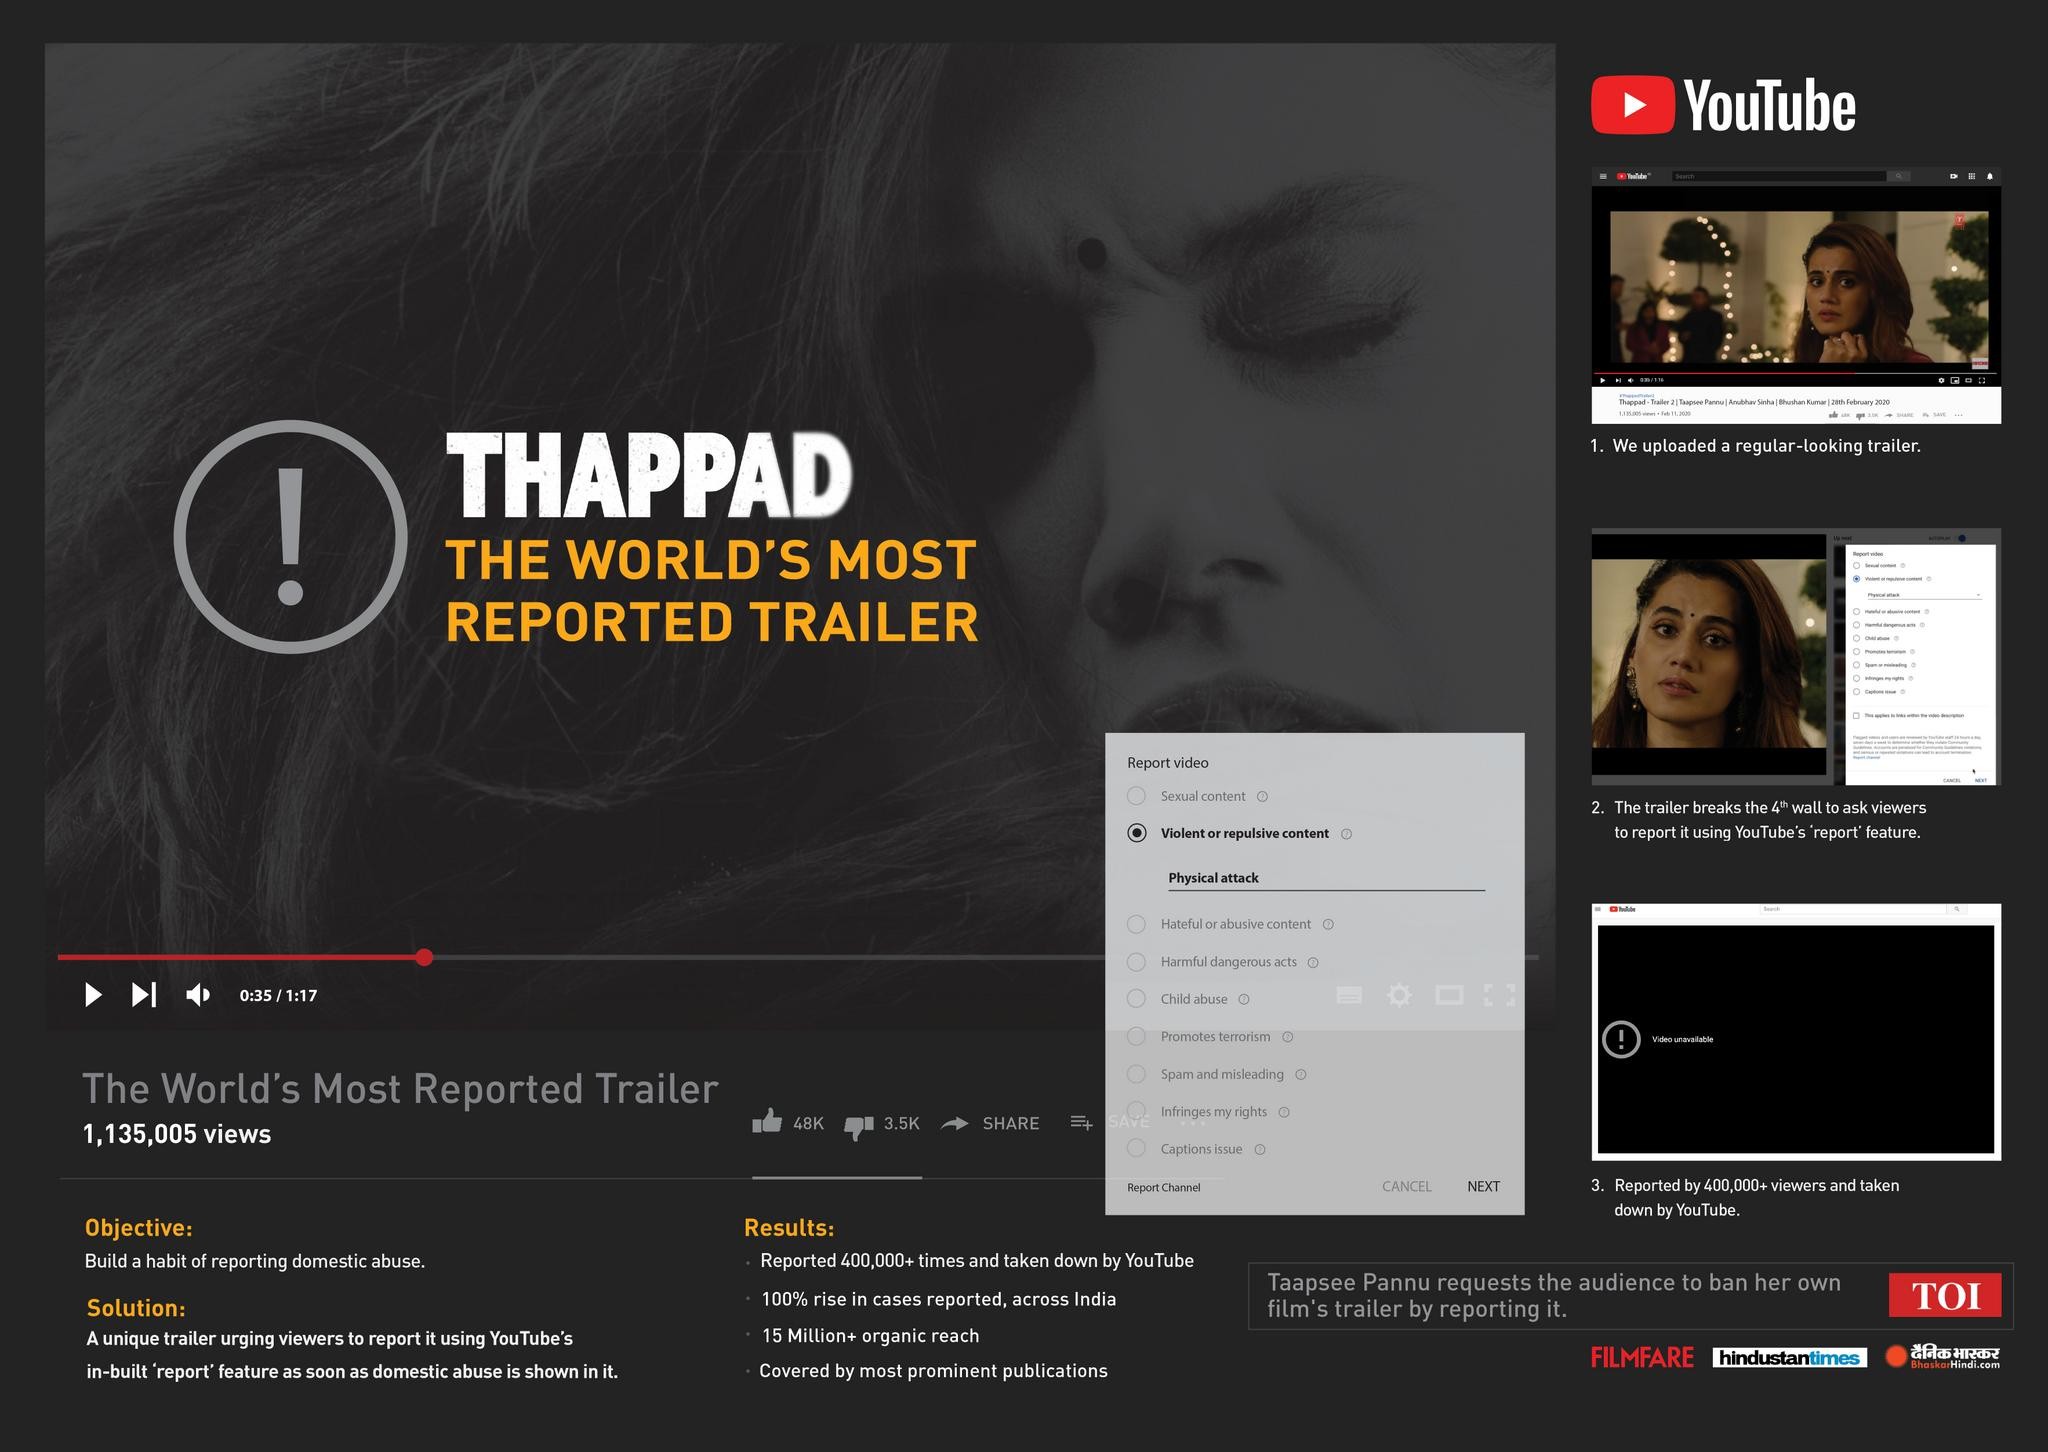 THE WORLD'S MOST REPORTED TRAILER